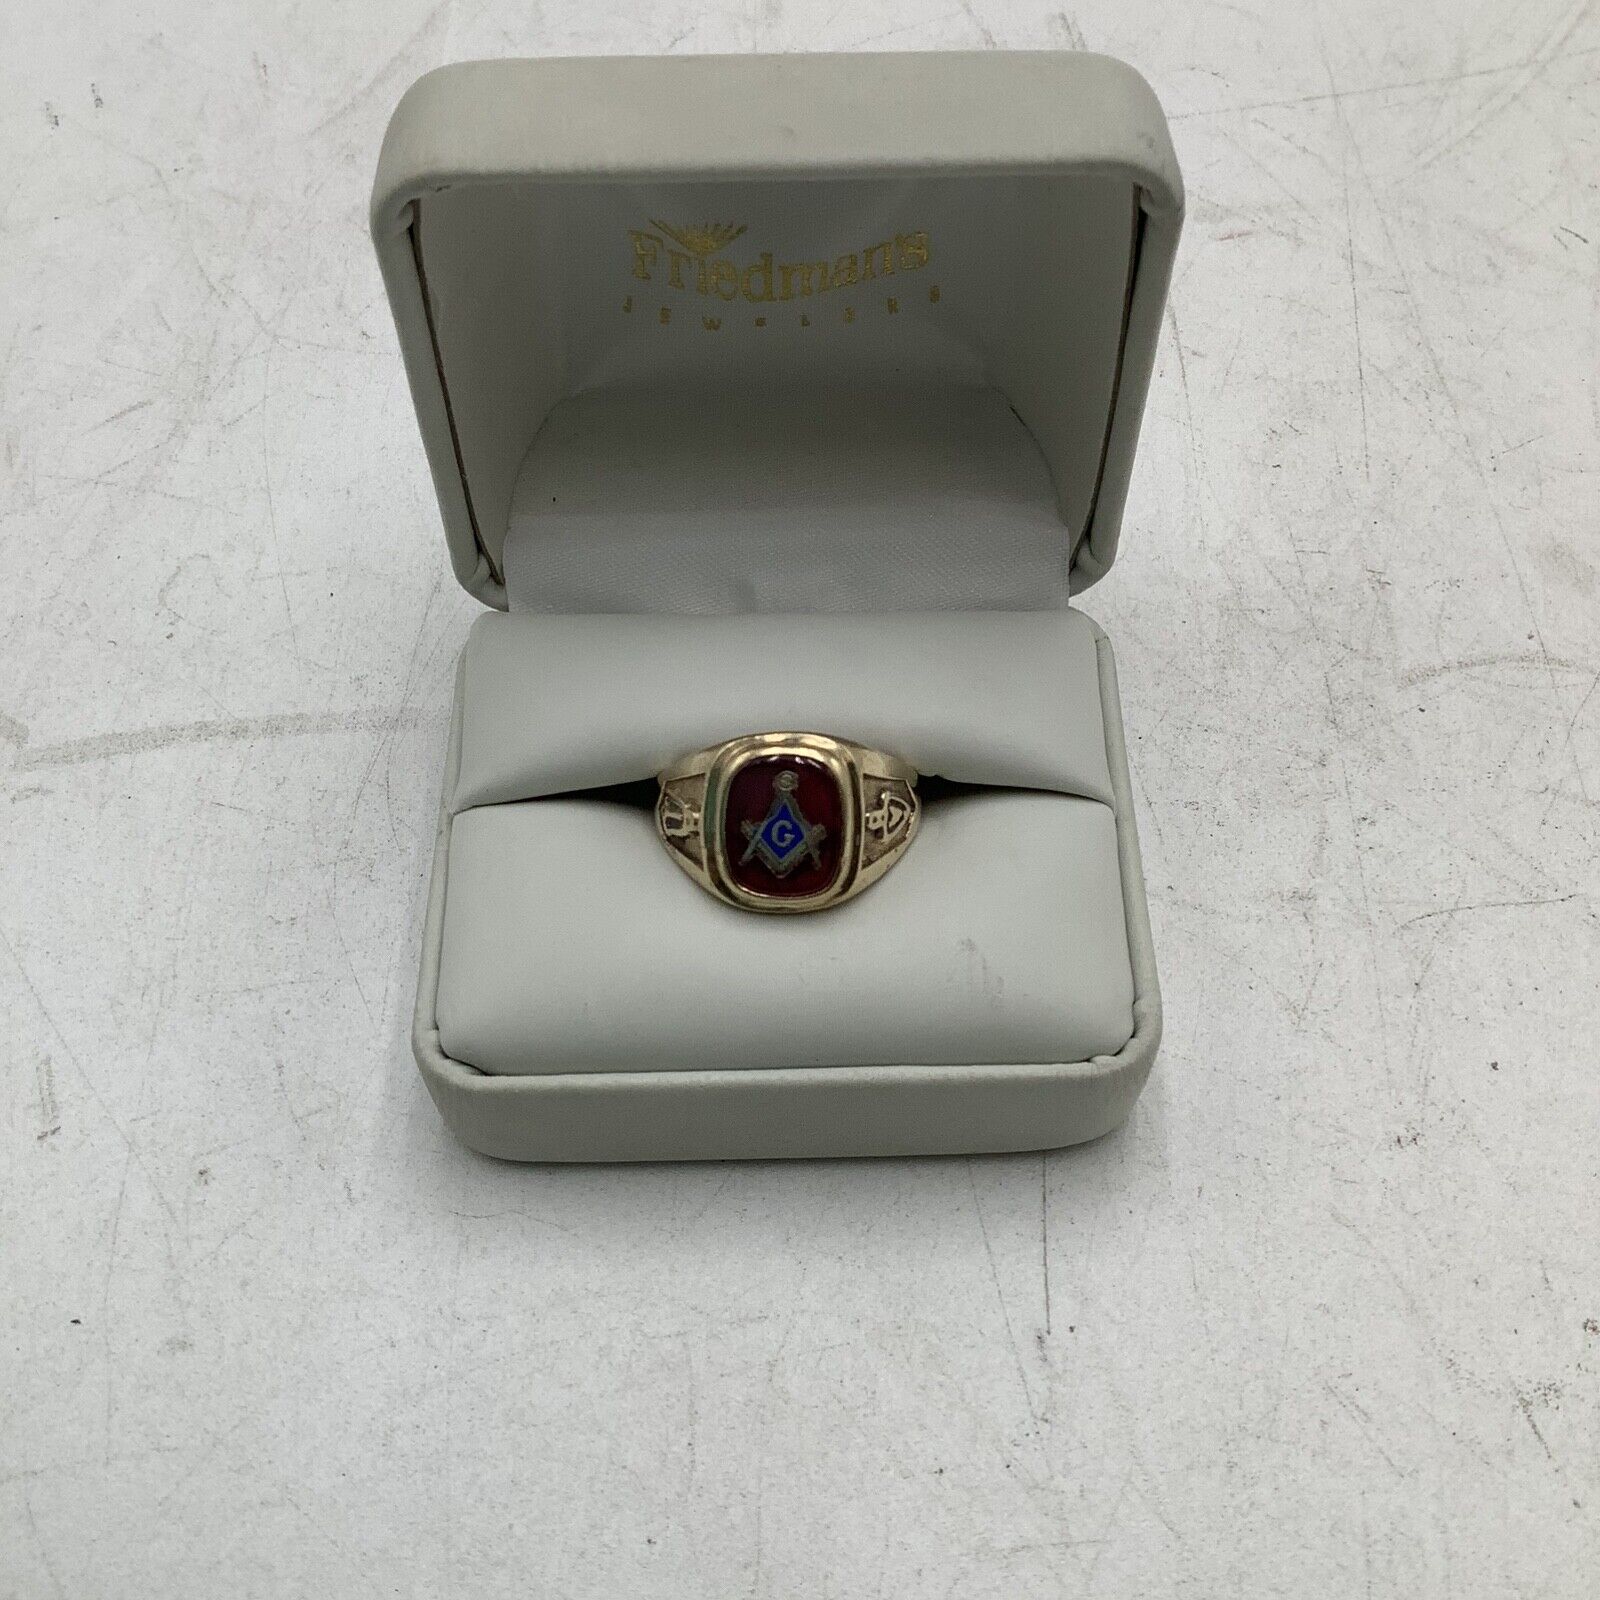 10kt Yellow Gold Men's Masonic Ring with Red Oblong Stone 6.7 Grams Size 9.5